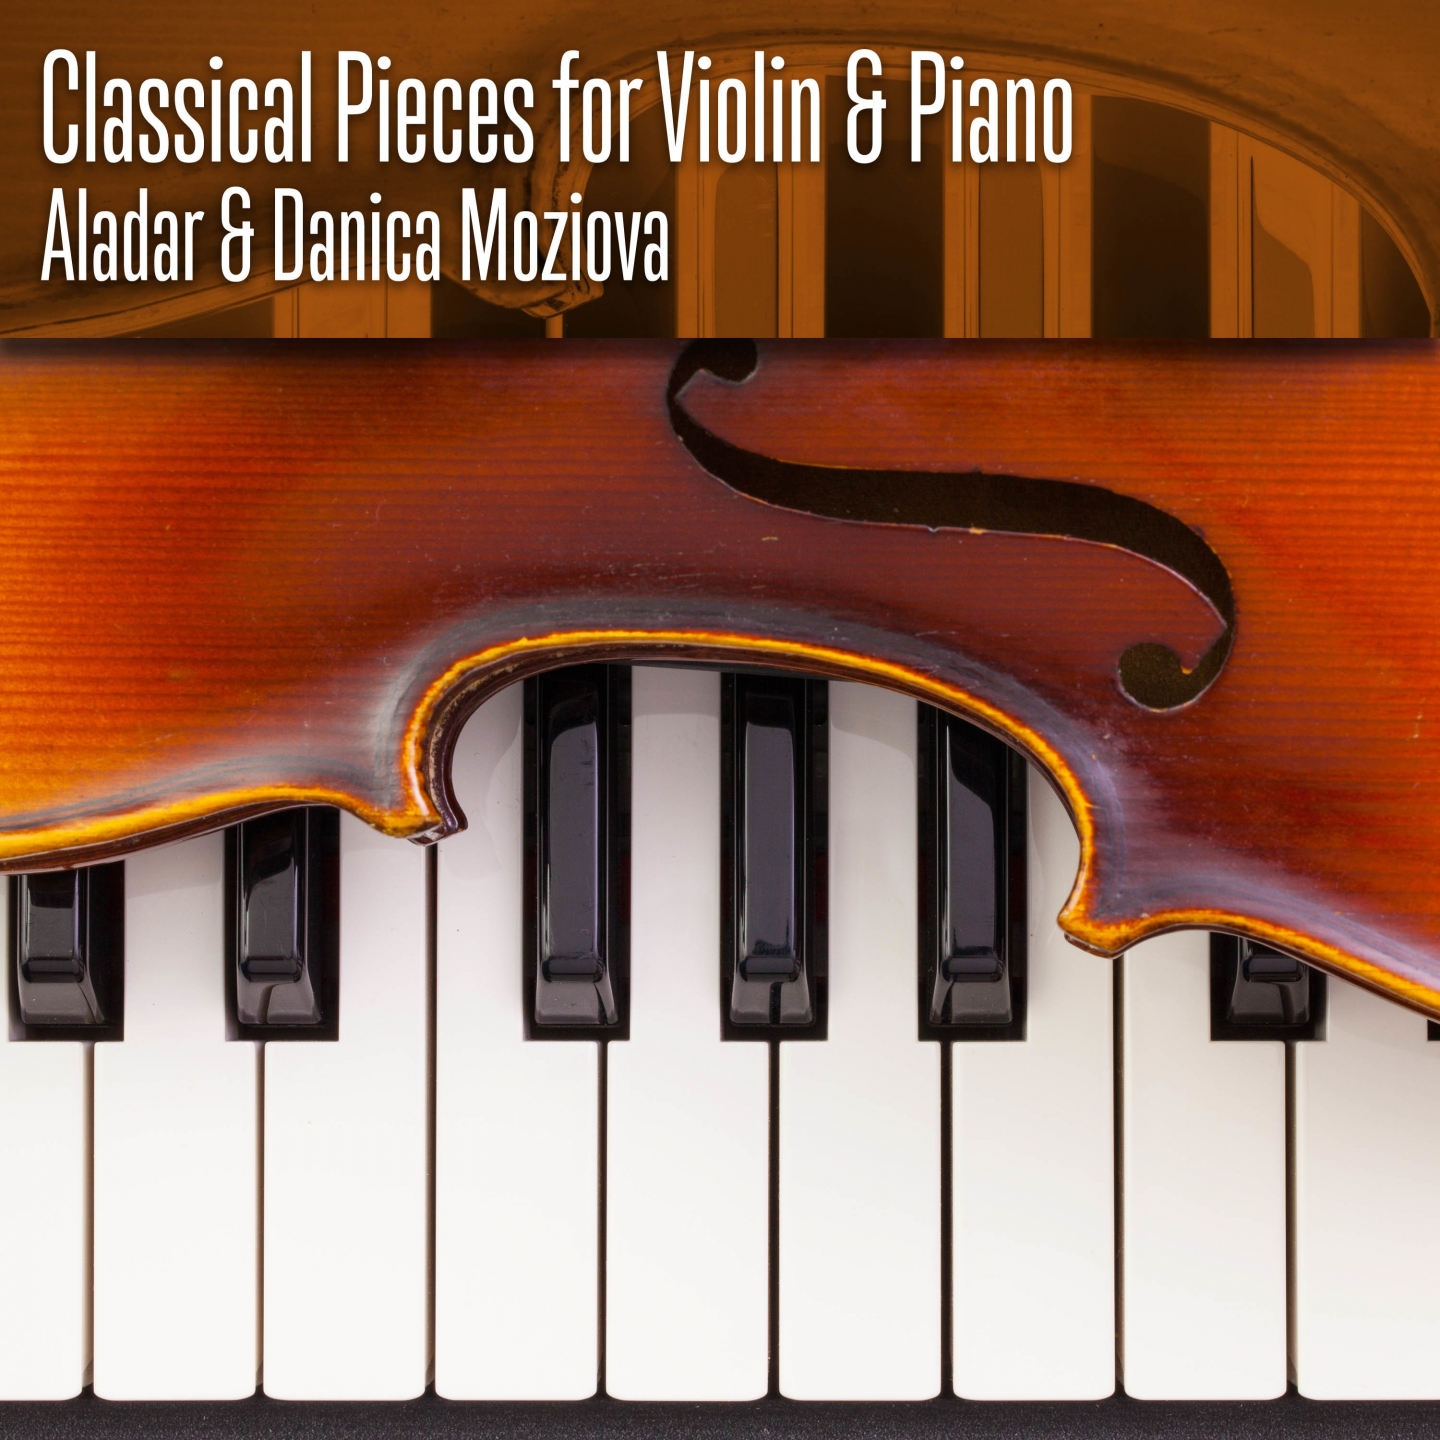 Classical Pieces for Violin & Piano